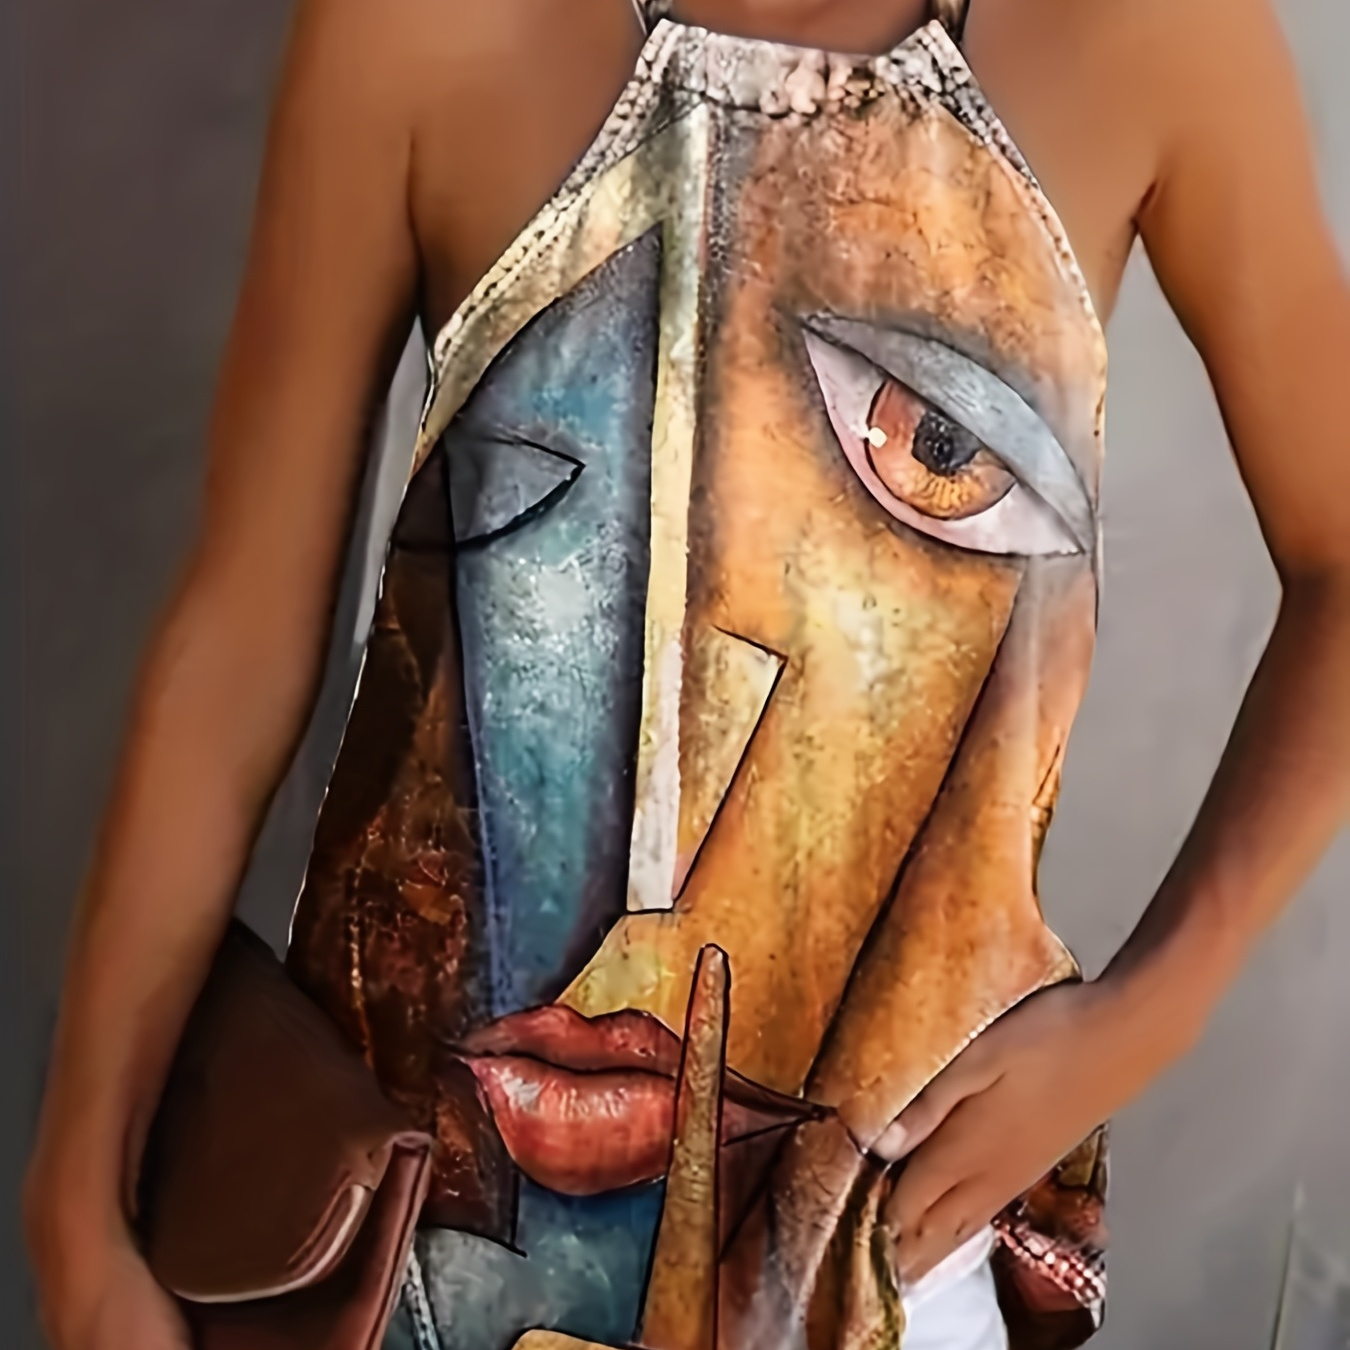 

Abstract Face Print Top, Casual Sleeveless Cami Tie Back Comfy Top, Women's Clothing